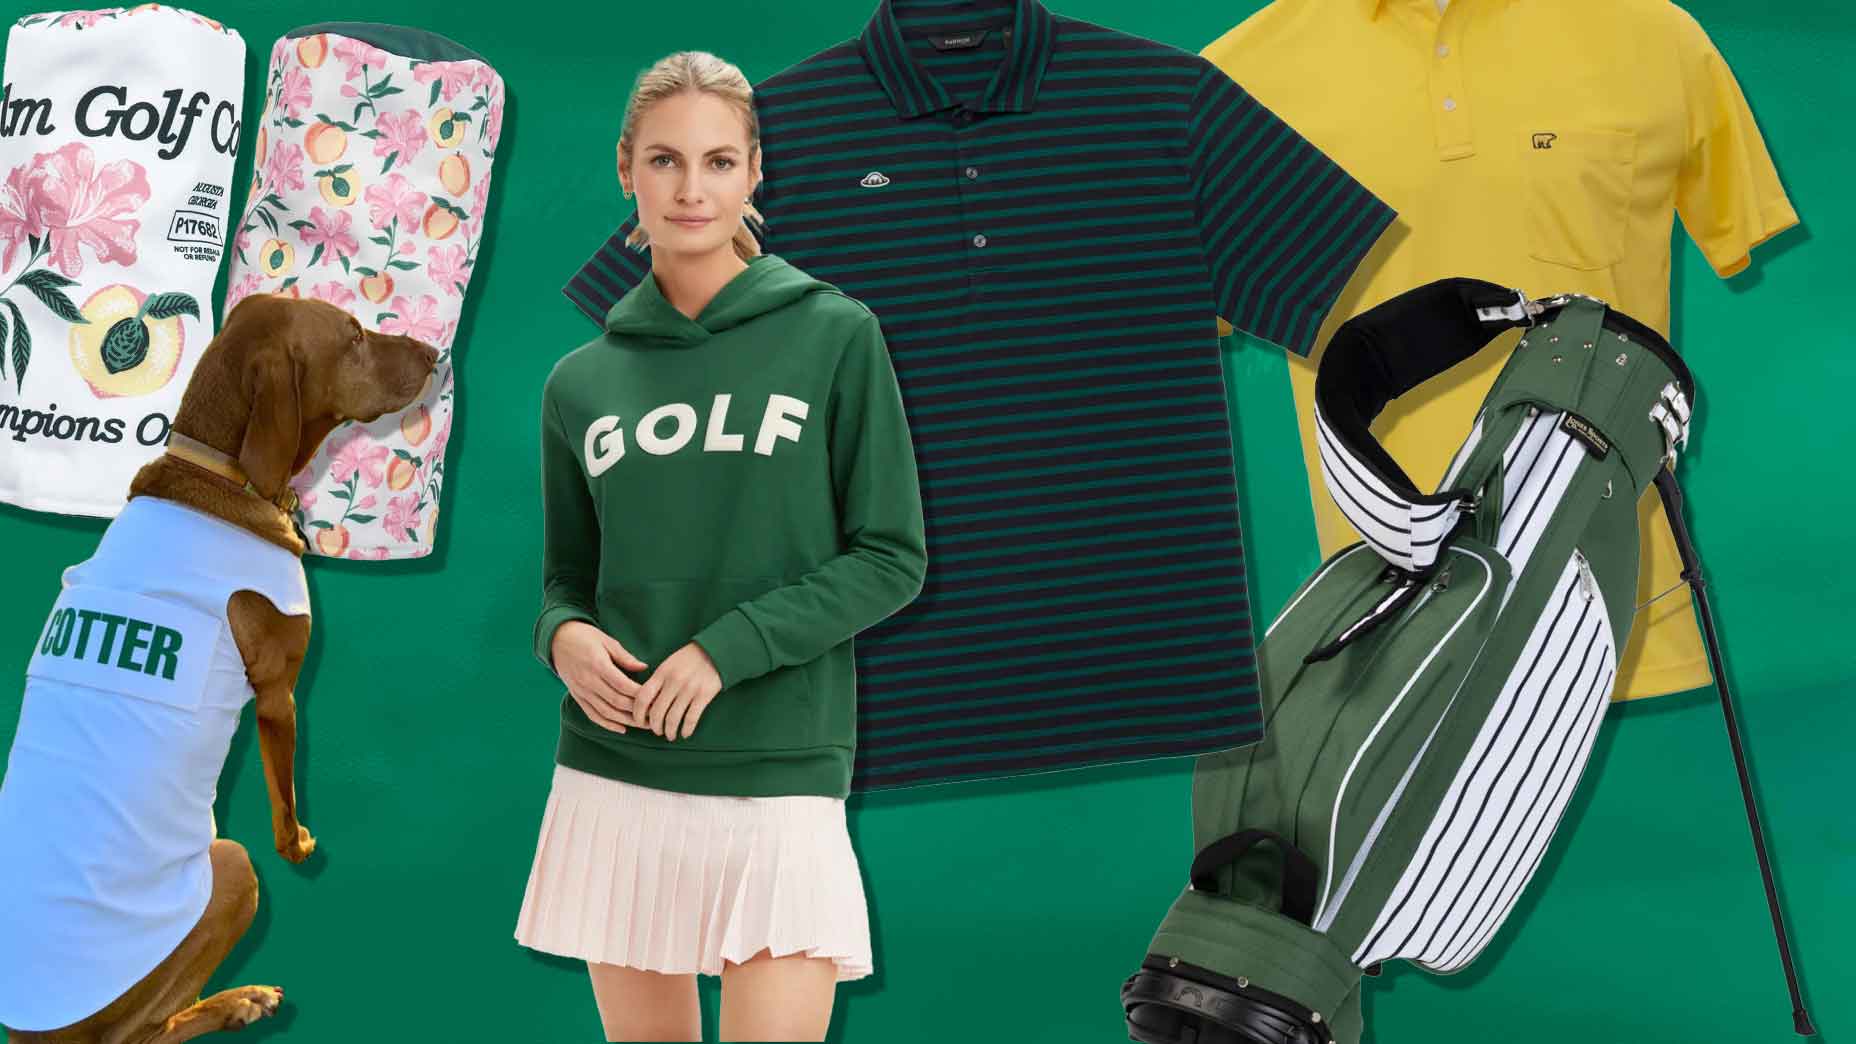 Shop this cool Masters-ready gear from Fairway Jockey